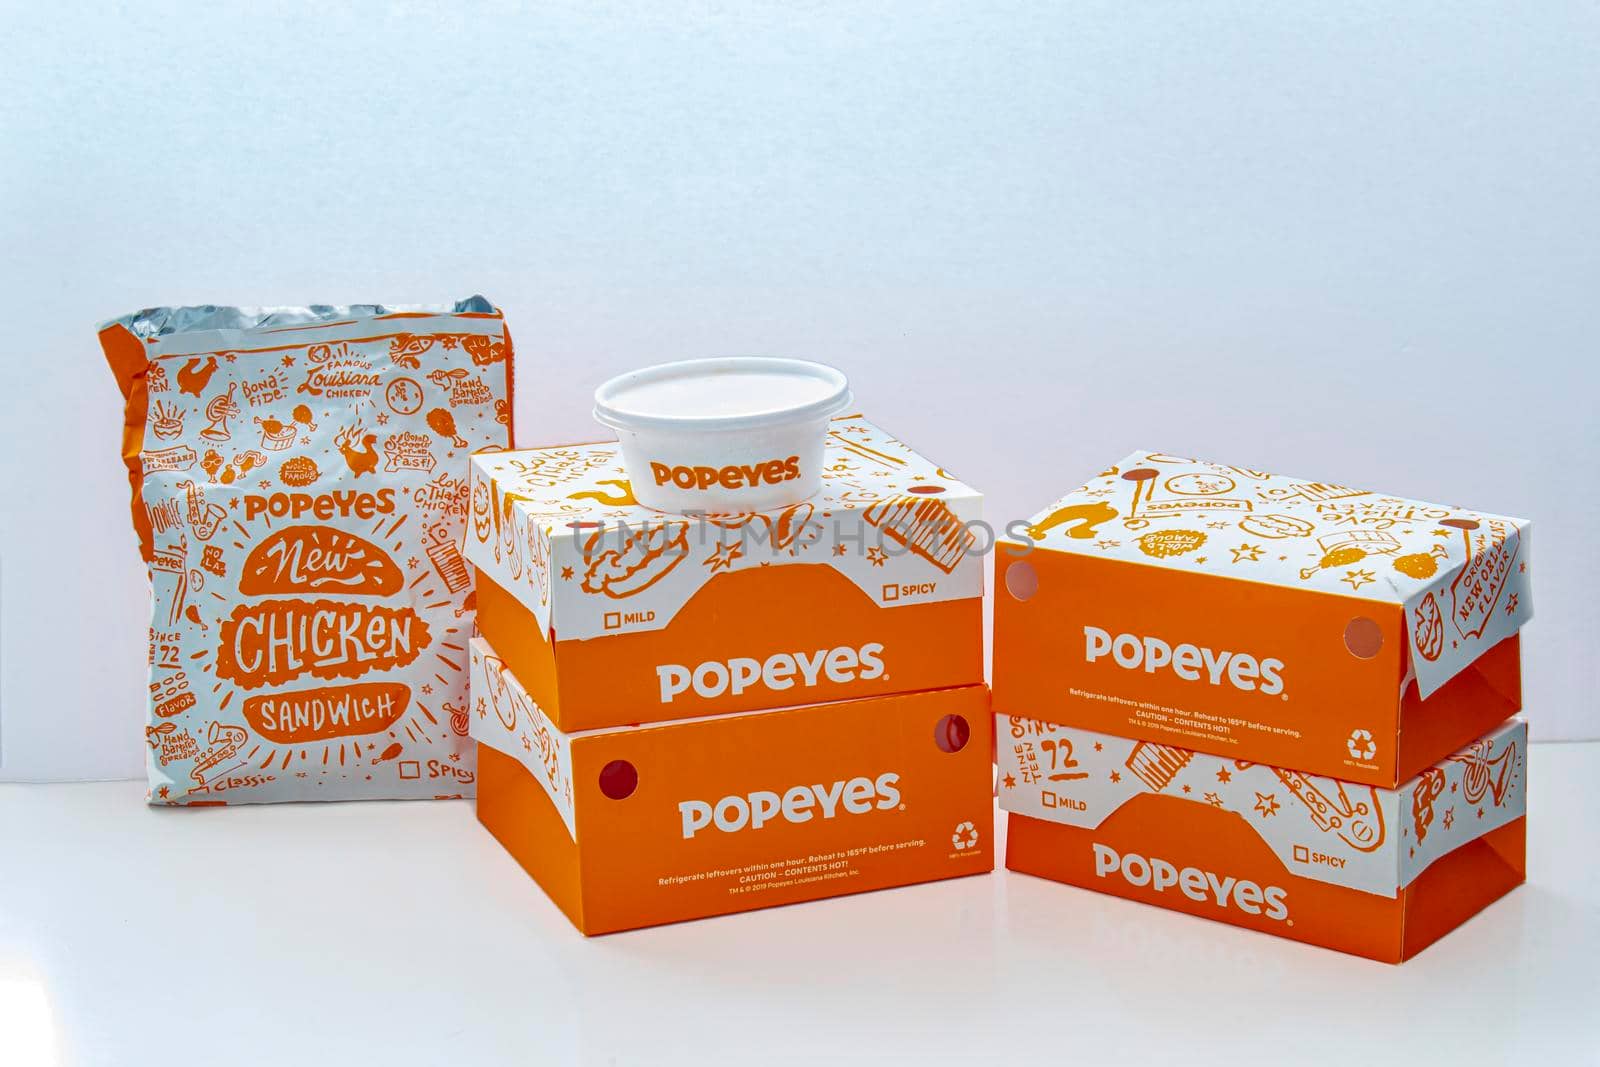 Calgary, Alberta, Canada. Oct 22, 2020. Popeyes boxes of chicken, burgers, cole salad and fries on a white background. by oasisamuel